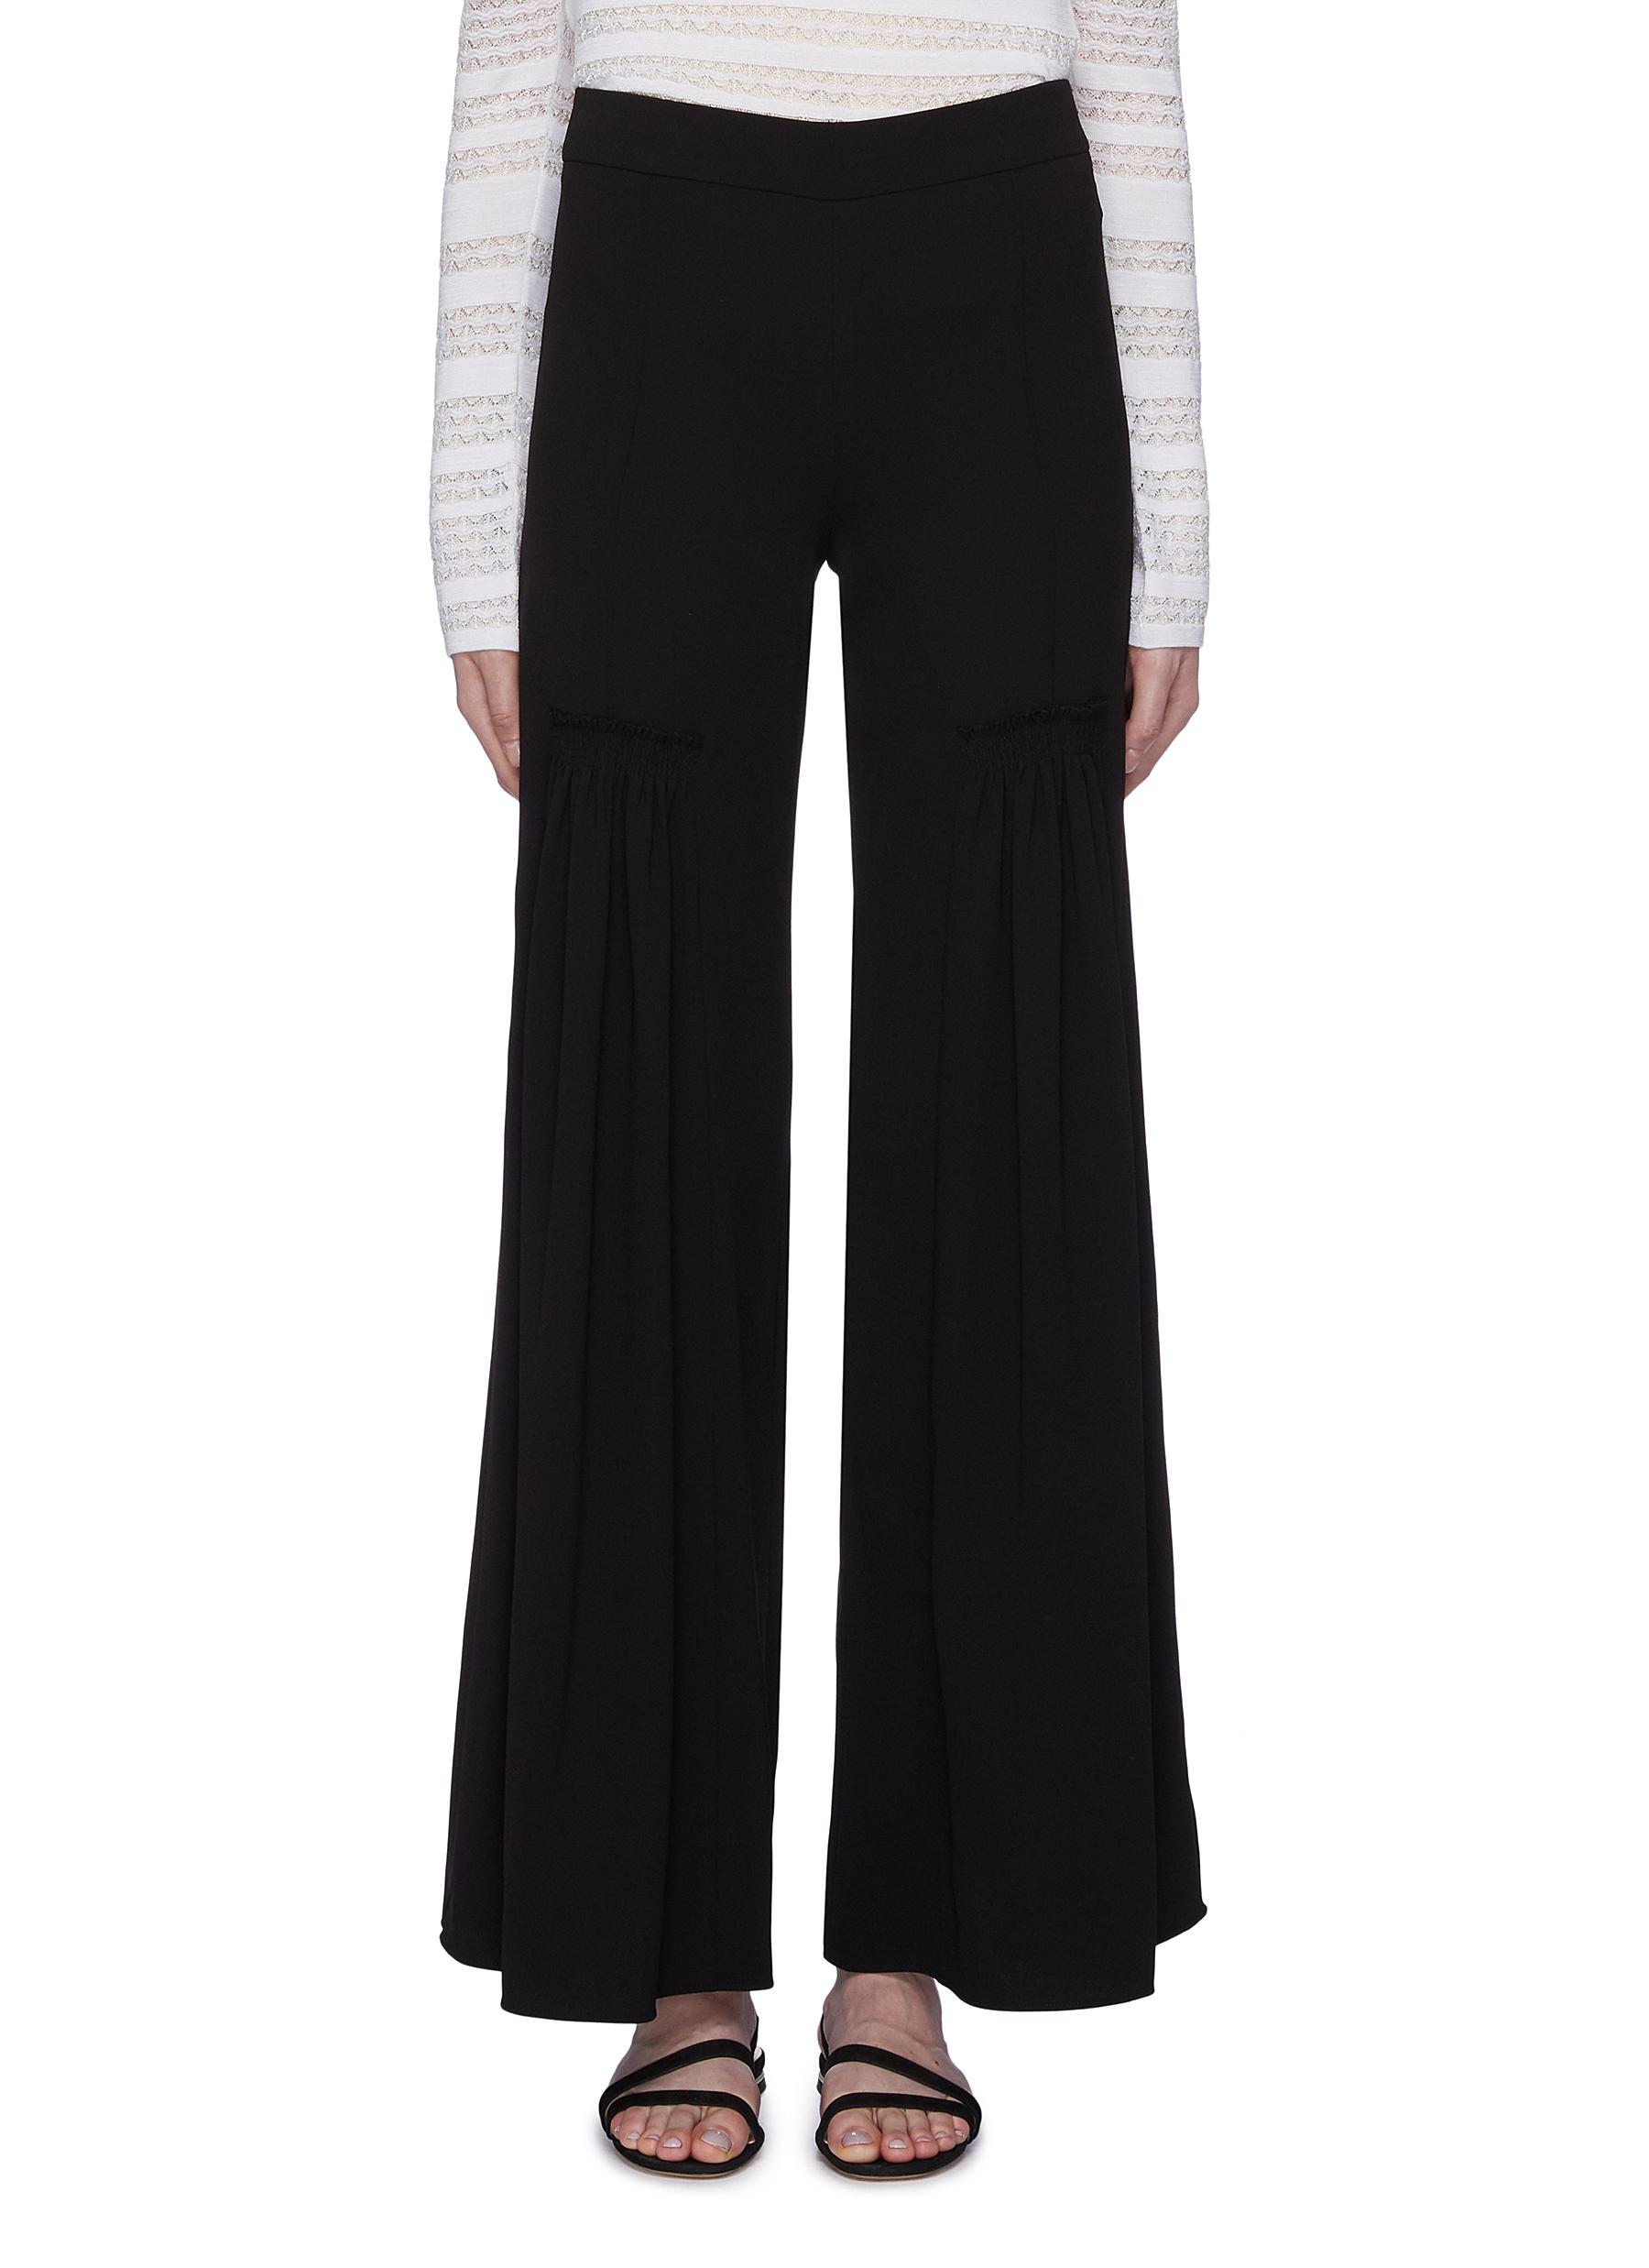 Shirred crepe flared pants by Chloé